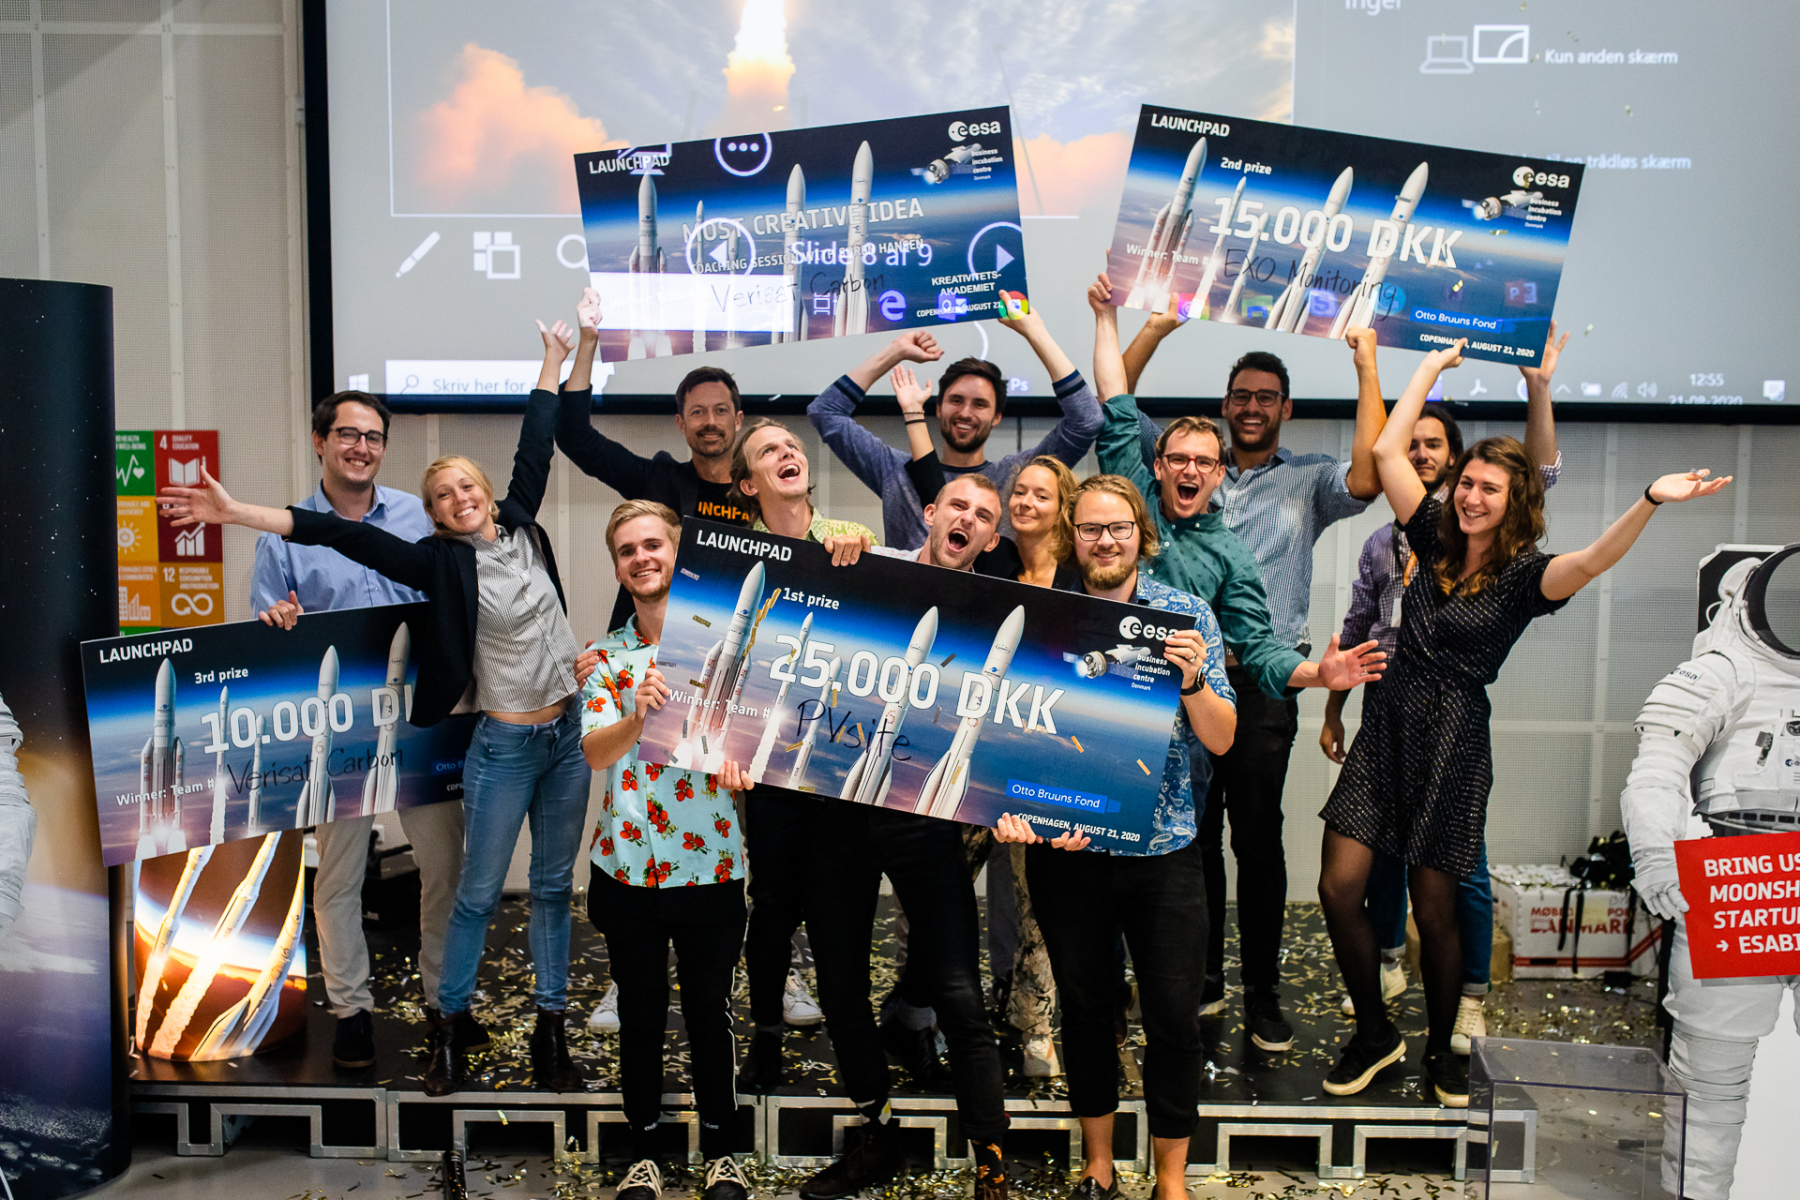 The three winning teams from Denmark’s ESA BIC Launchpad 2020 pre-incubation programme were PVSite with ‘Utilization of satellite data for construction and operation of solar parks’ (1st), EXO Monitoring with ‘Geophysical risk assessment of real estate transactions using satellite data’ (2nd) and Verisat Carbon with ‘Platform for trading CO2-reducing forestation with satellite verification’ (3rd). Image credit: Kaare Smith/ESA BIC Denmark 